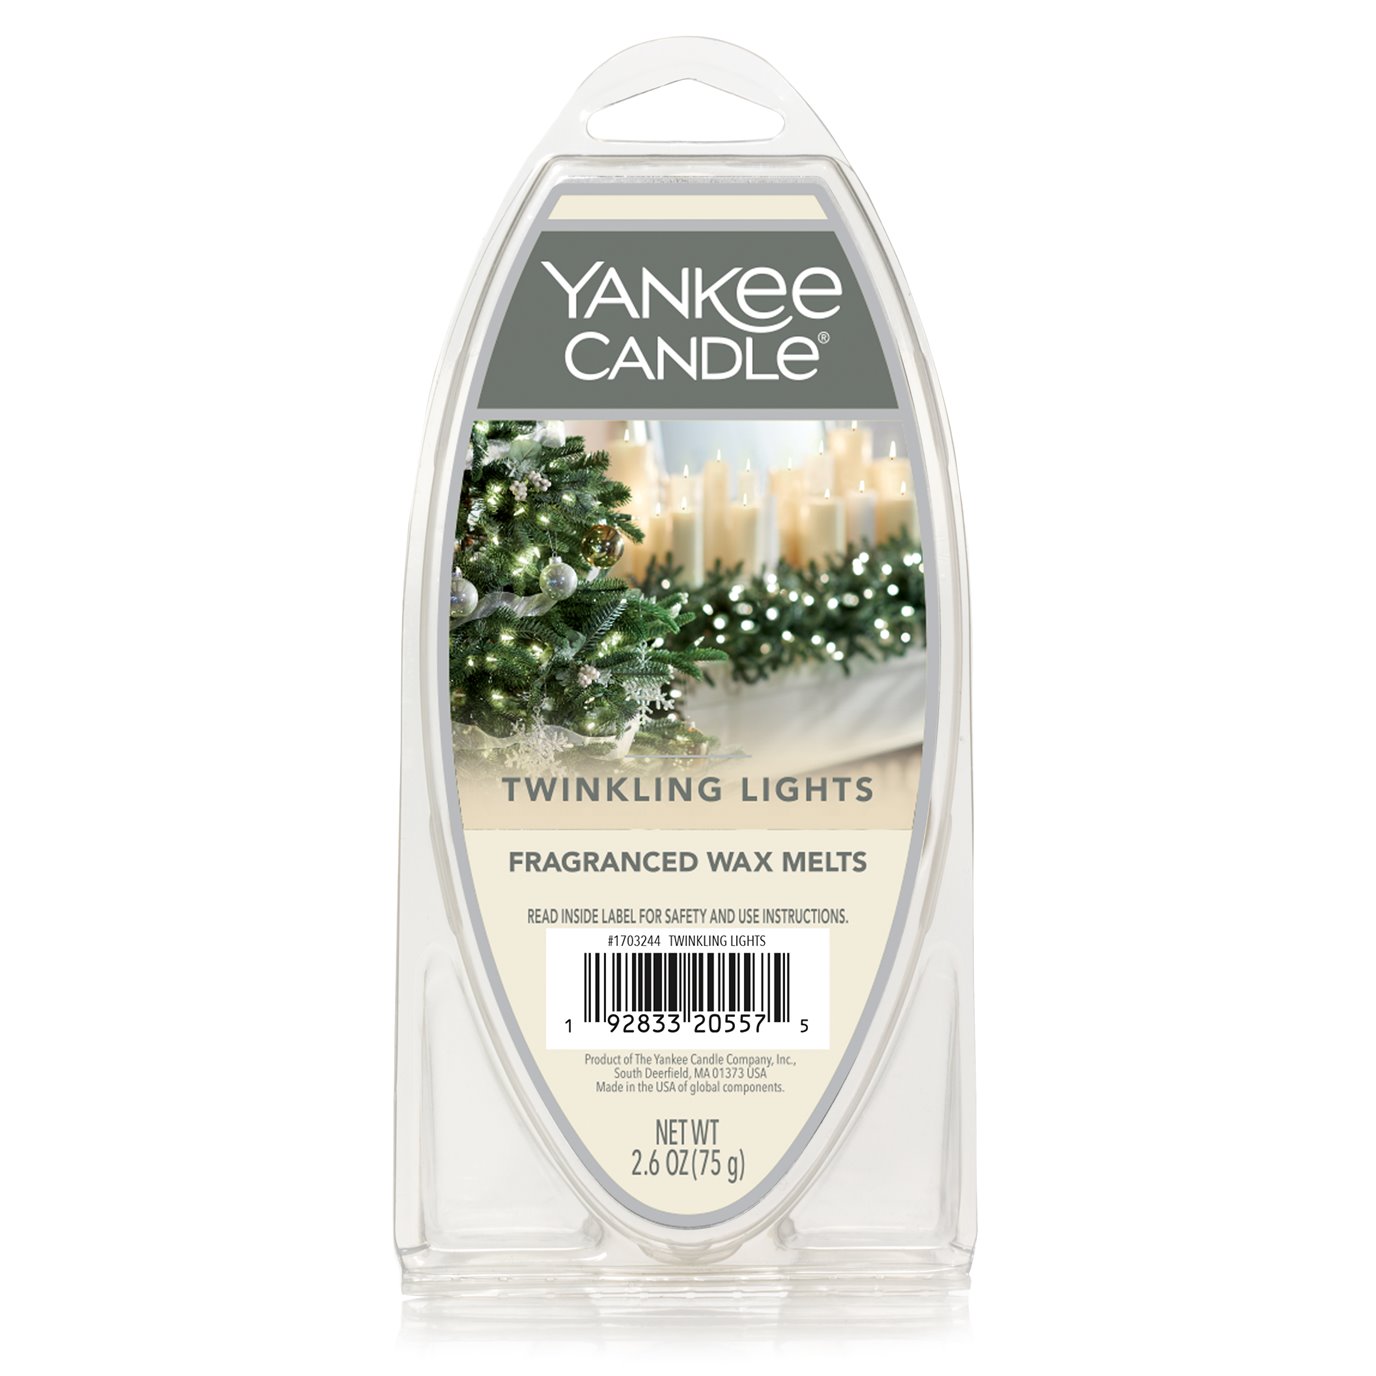 Yankee Candle Twinkling Lights Wax Melts 6-Pack